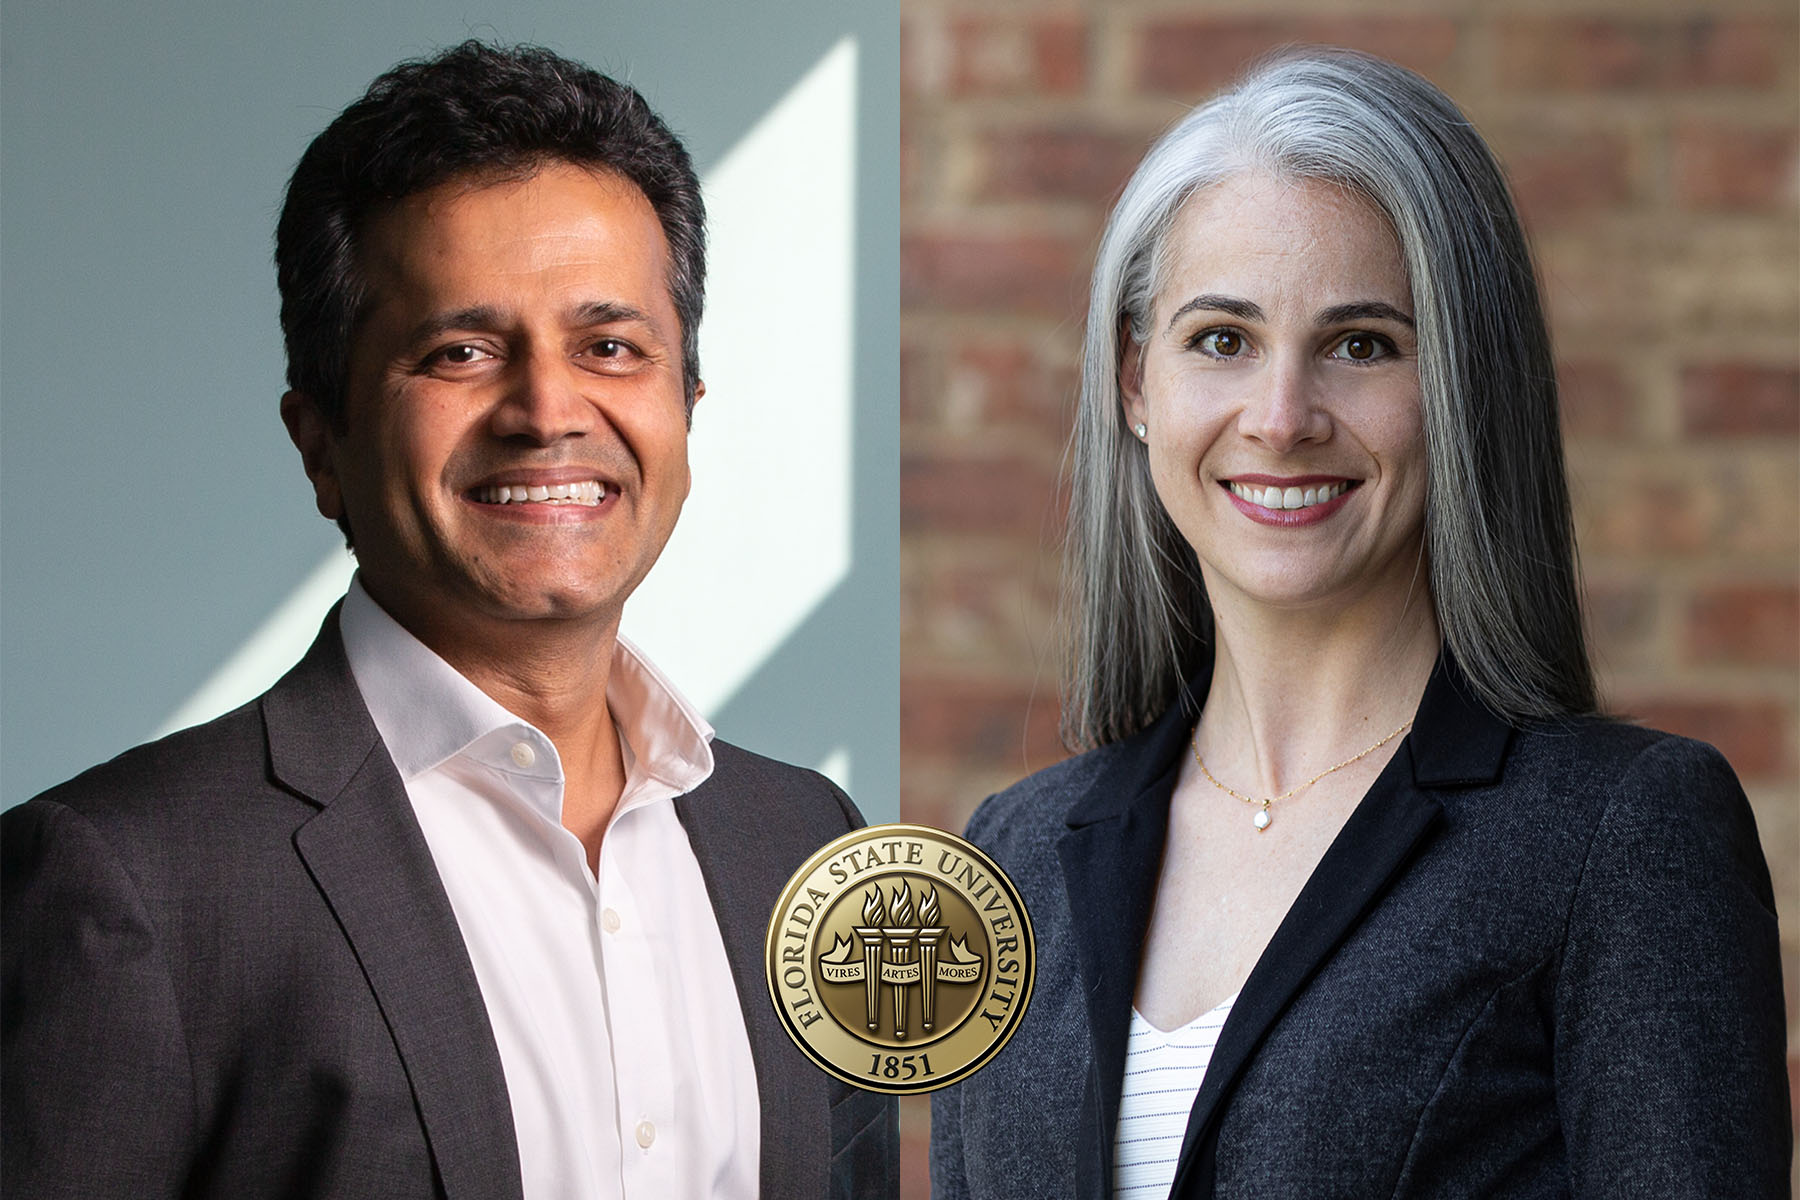 (L to R) Farrukh Alvi, the Don Fuqua Eminent Scholar and Professor of Mechanical Engineering and Emily Pritchard, the new Assistant Vice President for Academic Affairs for Health Innovation & Strategic Alliances.